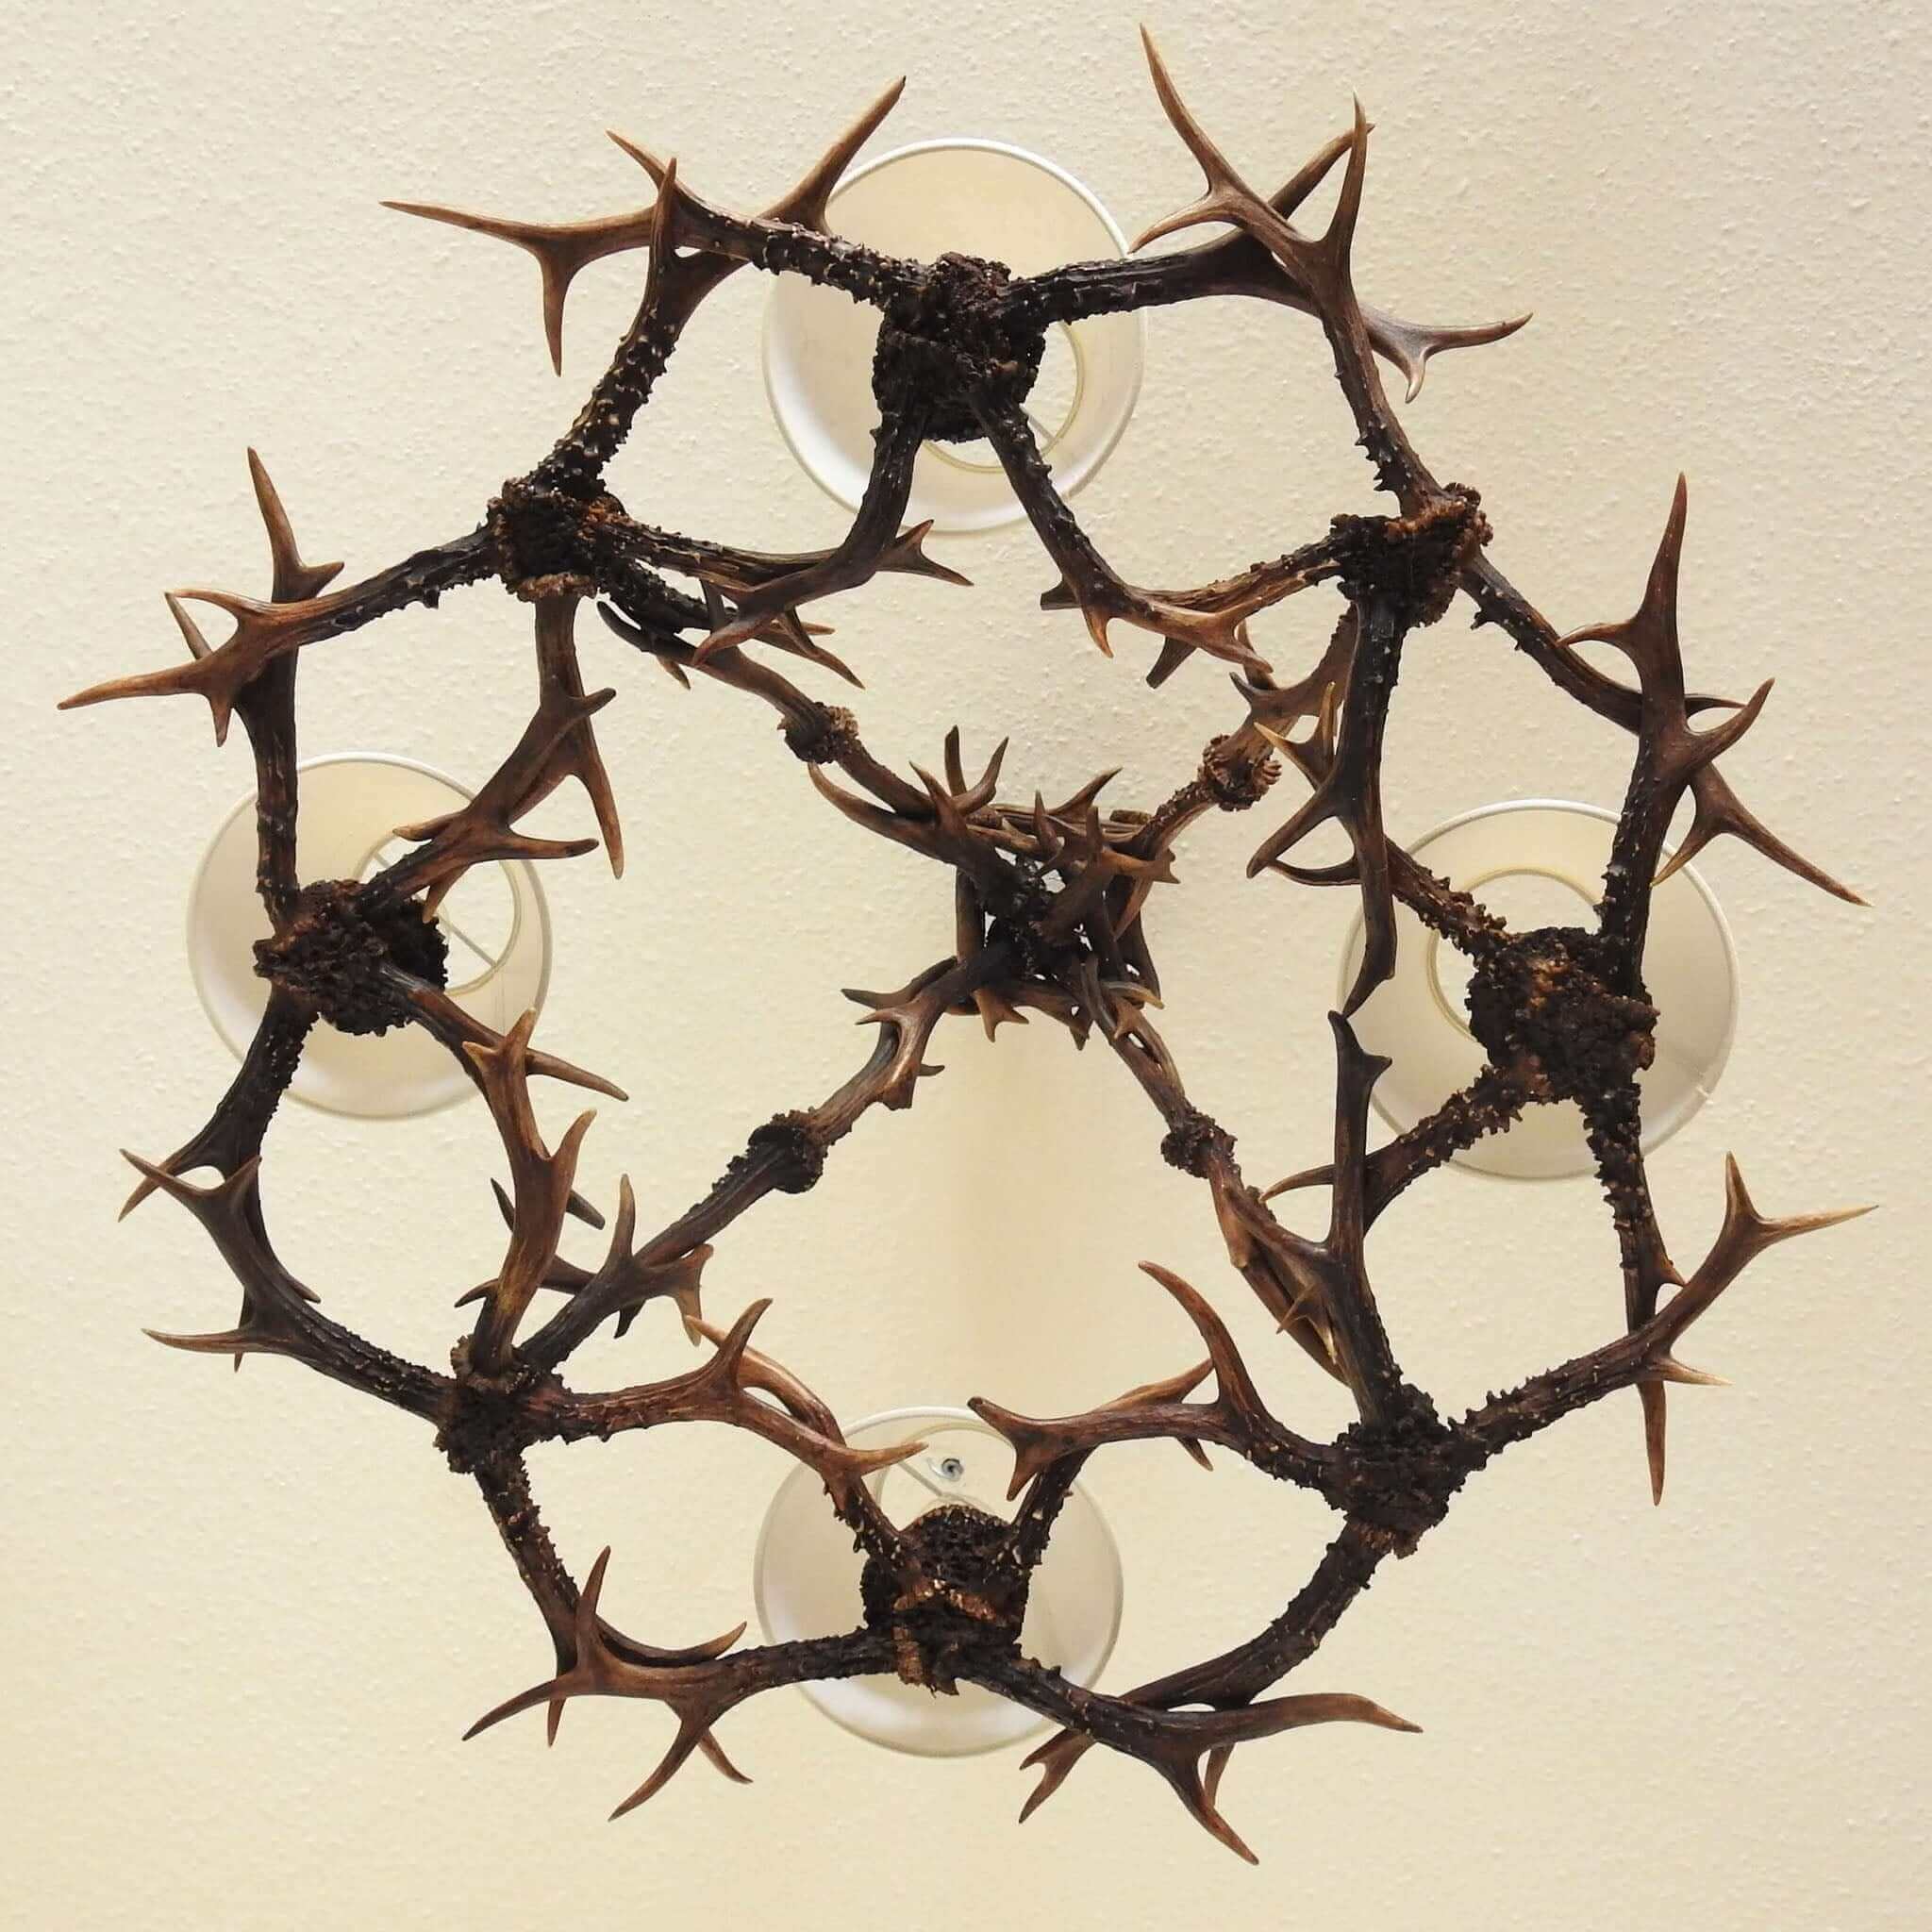 Antler chandelier, view from the bottom.